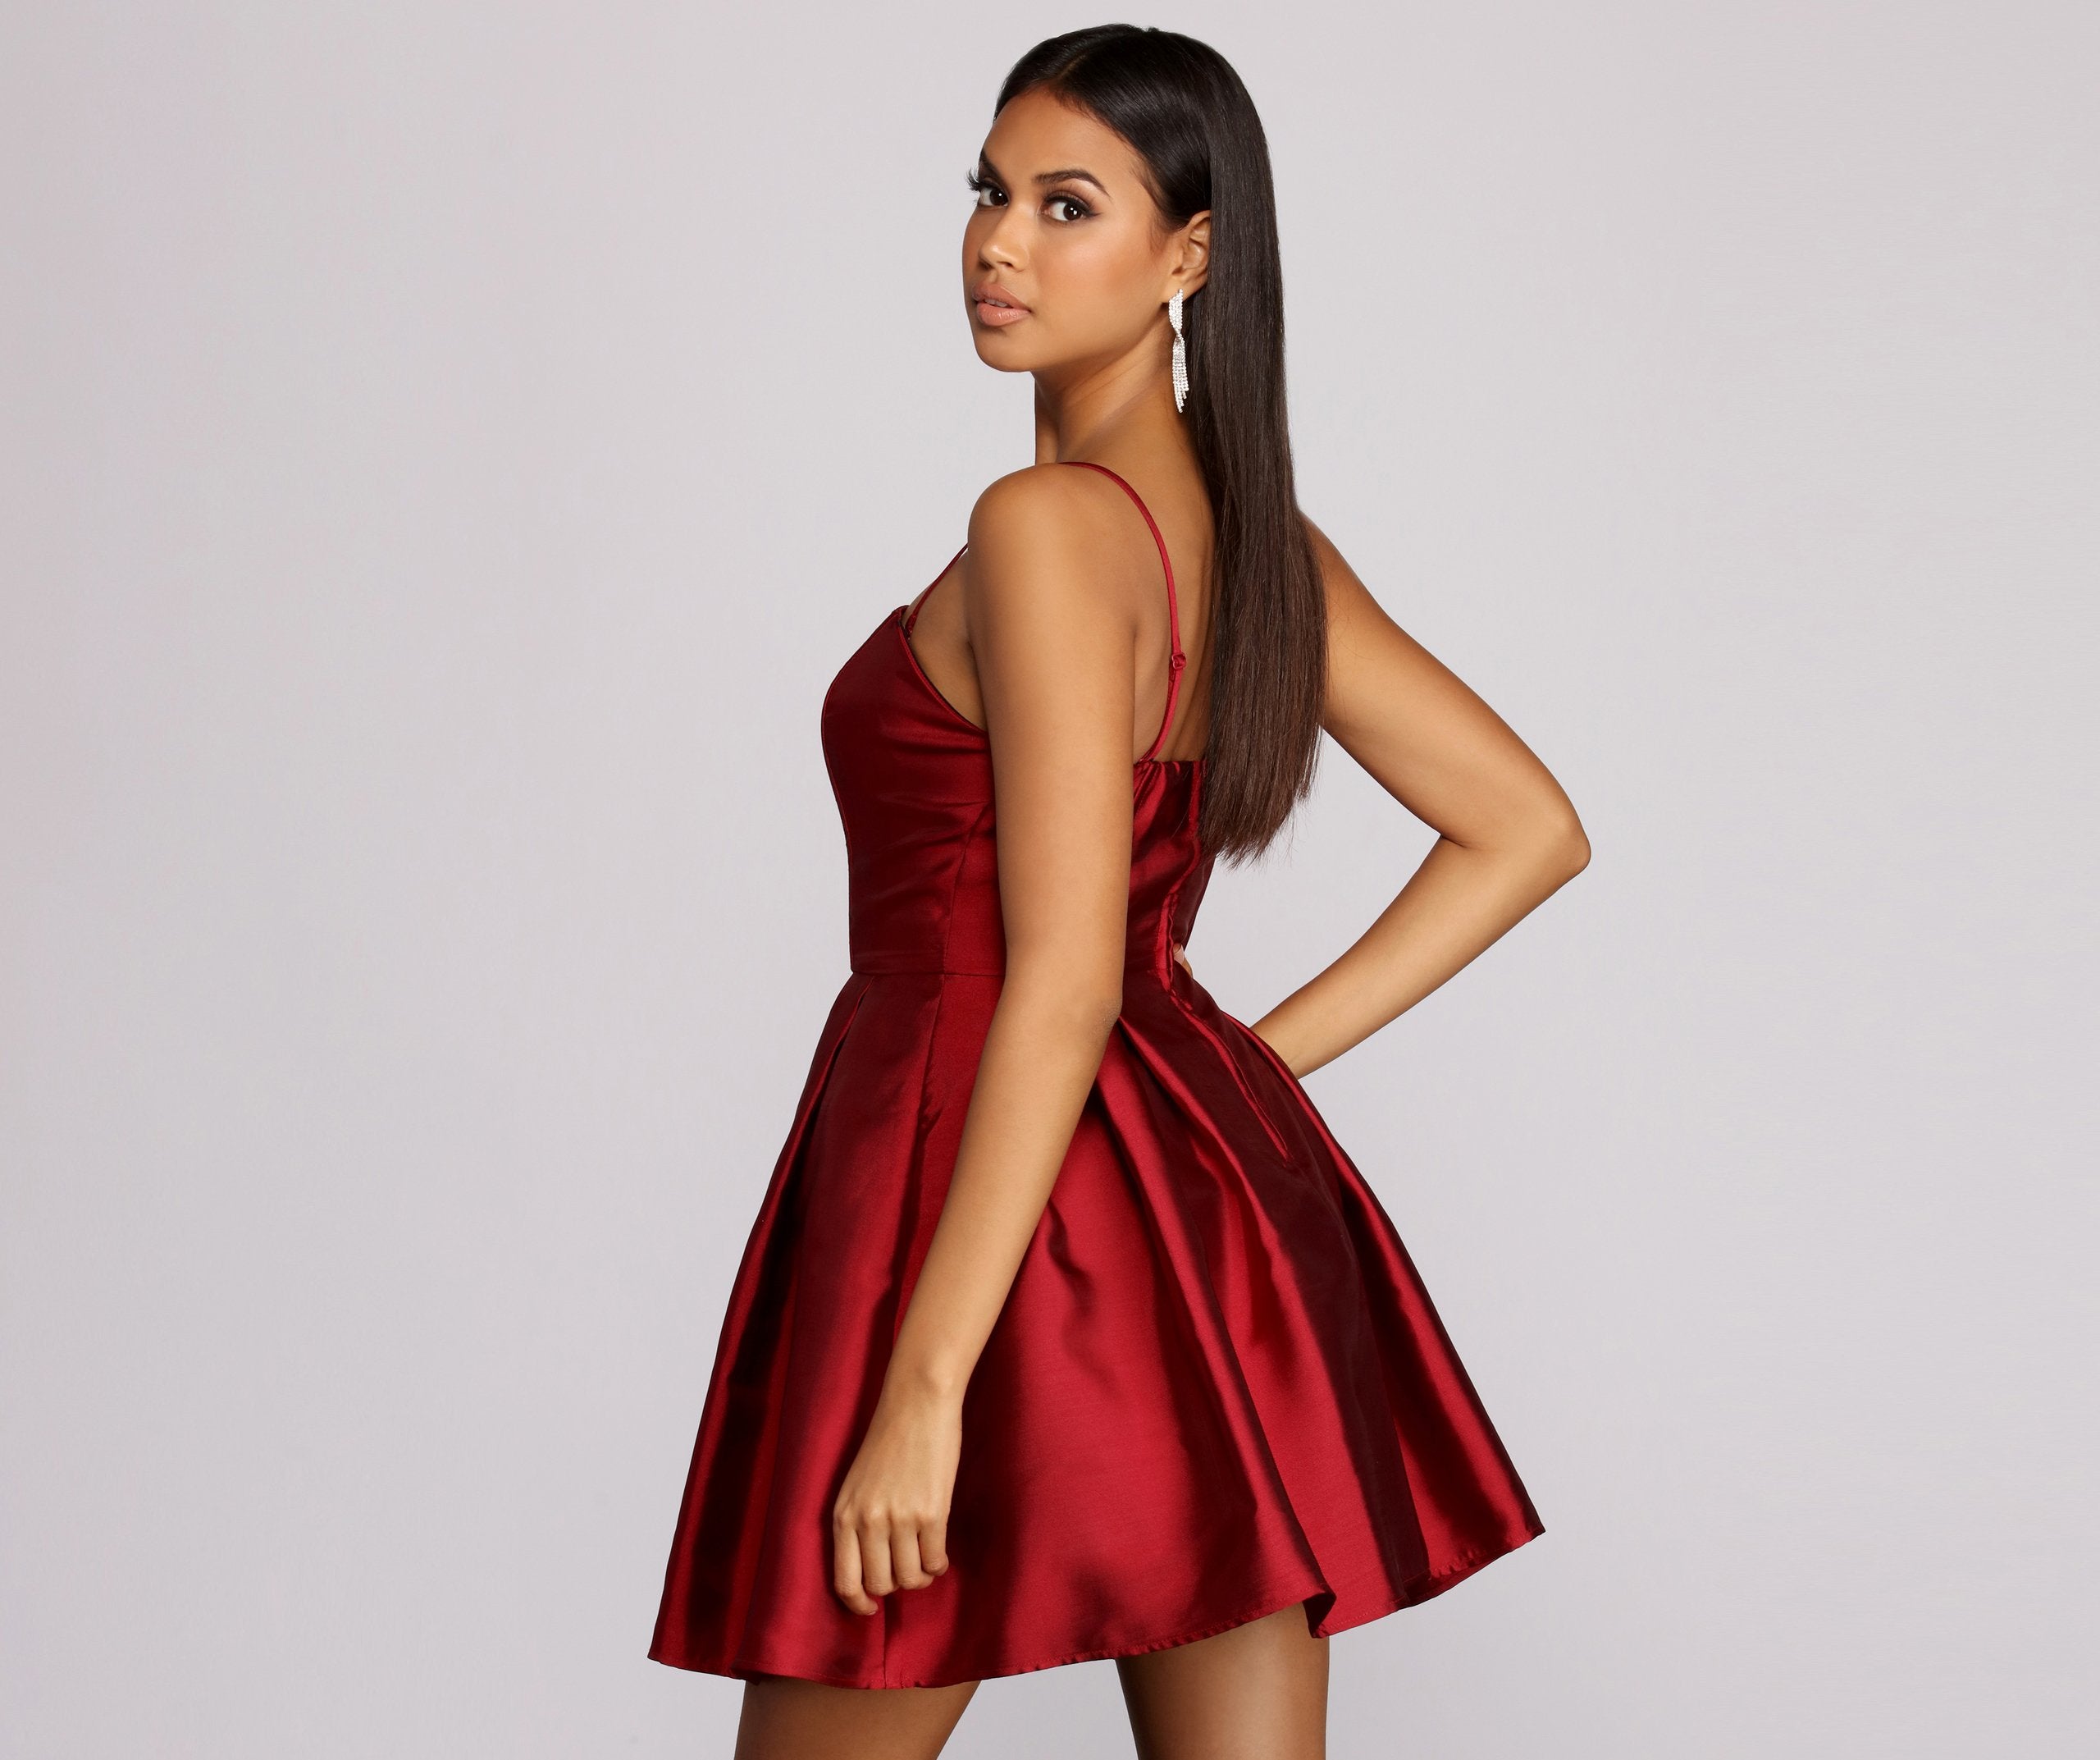 Rebecca Party Pleated Dress - Lady Occasions